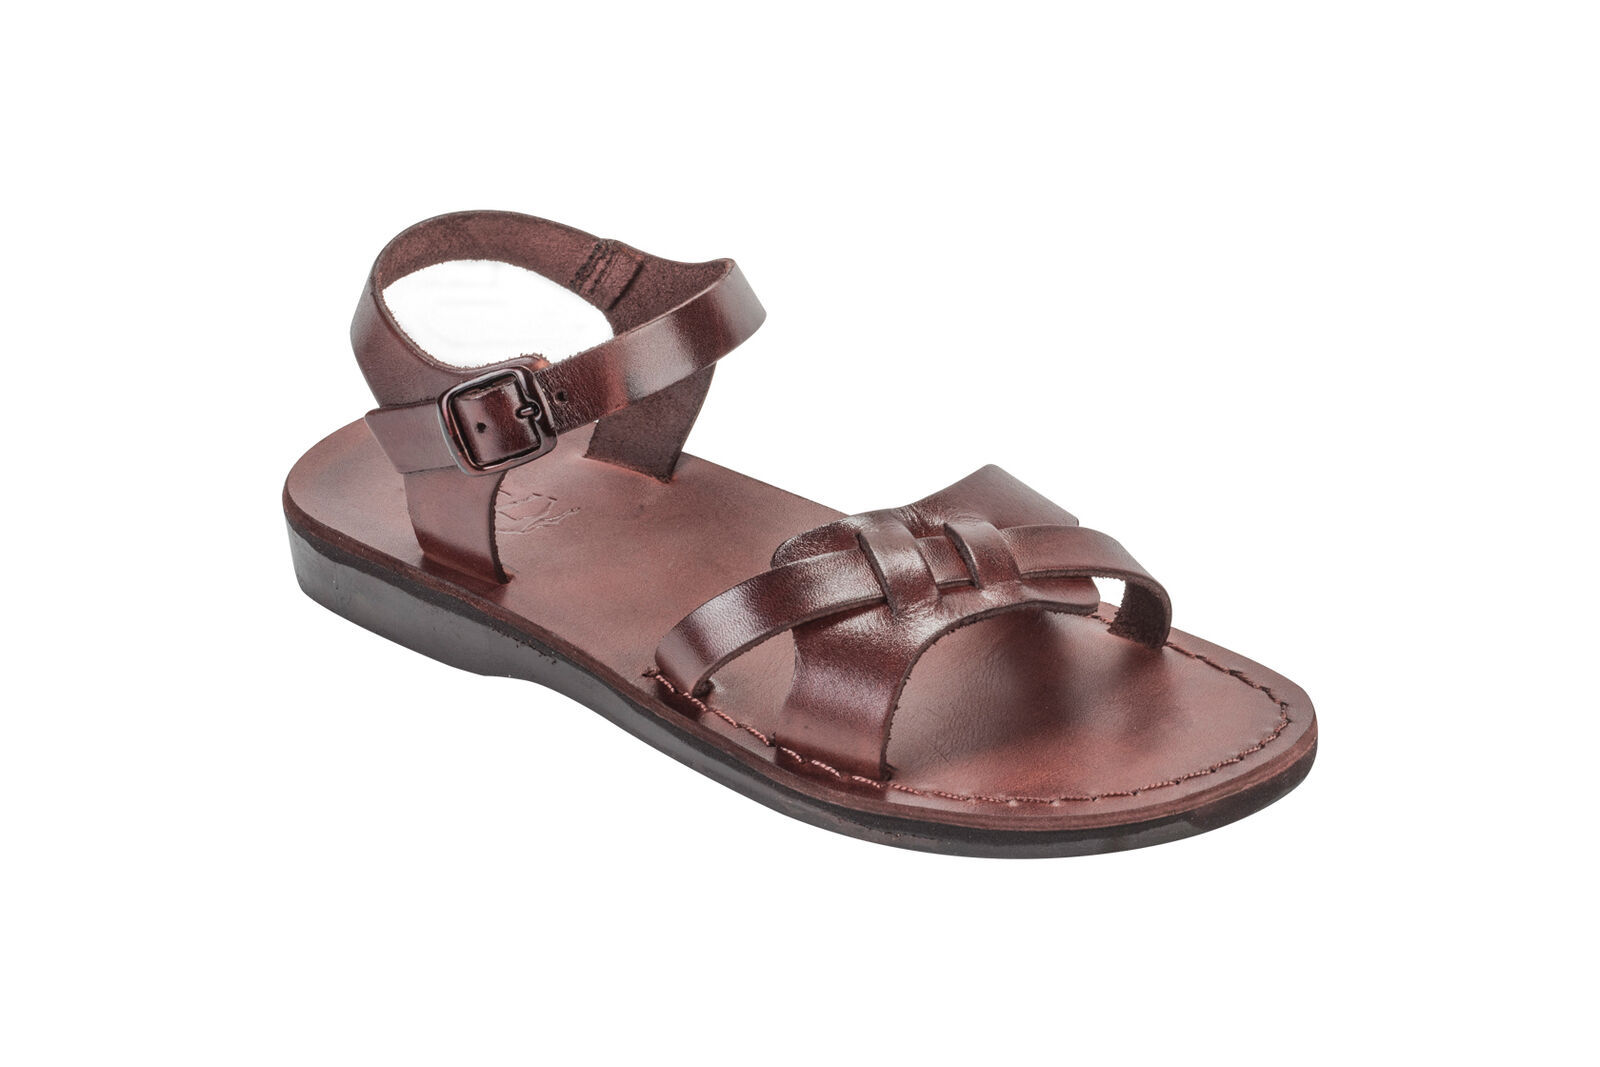 Women's Handmade Biblical Sandals from Israel Natural Genuine Leather 5 ...